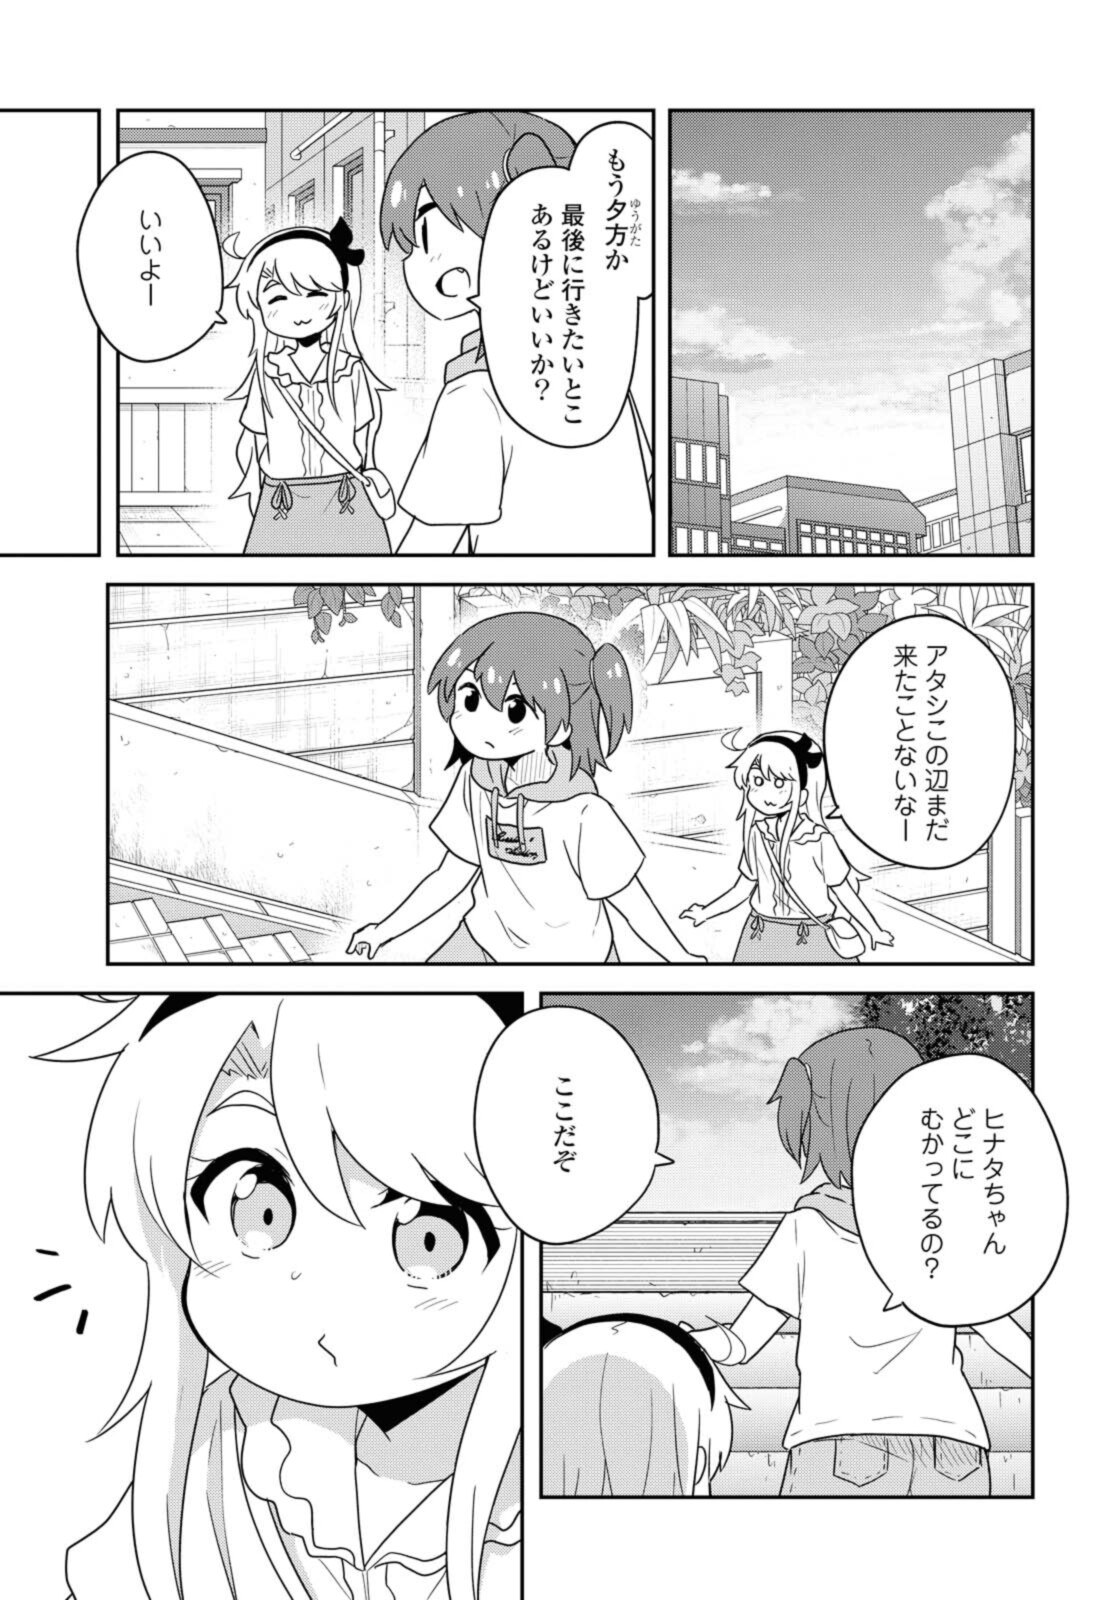 Wataten! An Angel Flew Down to Me 私に天使が舞い降りた！ 第86.2話 - Page 8